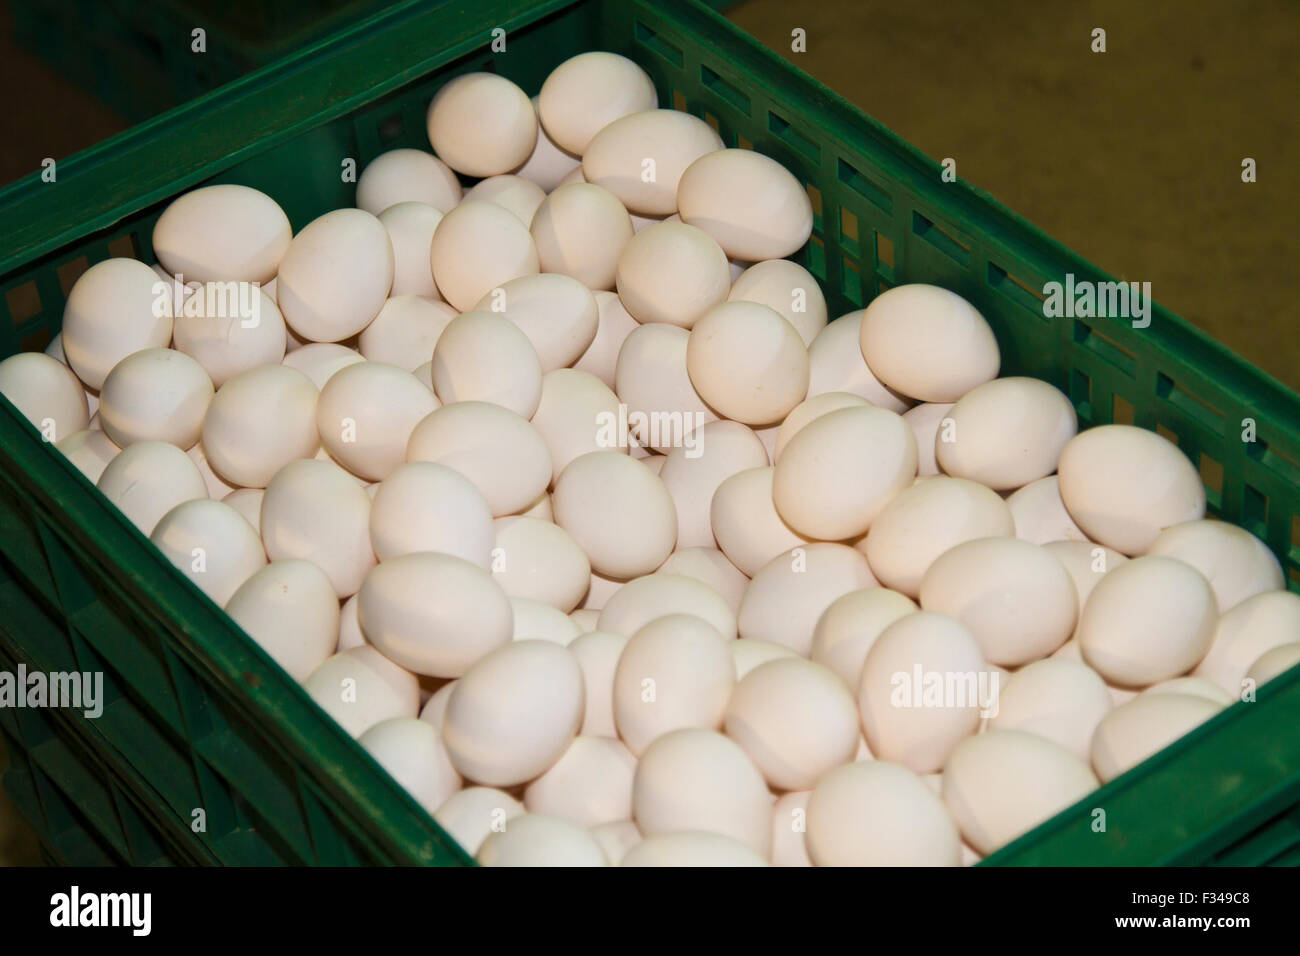 many eggs in basket Stock Photo